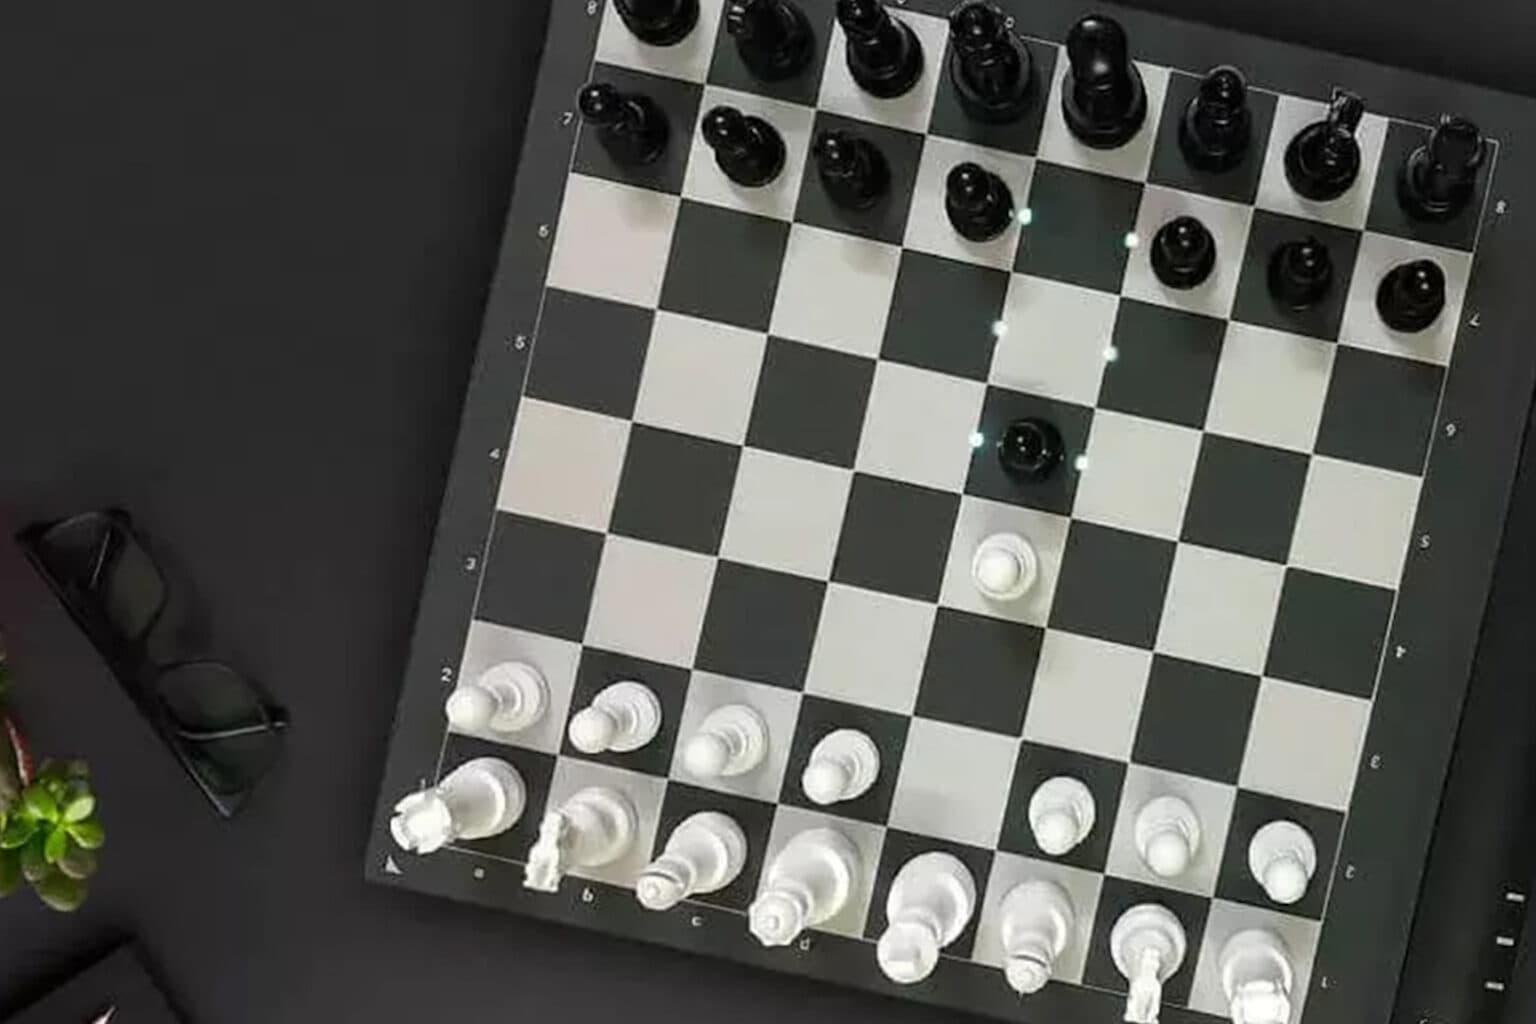 Play online or face-to-face with this e-Chessboard.